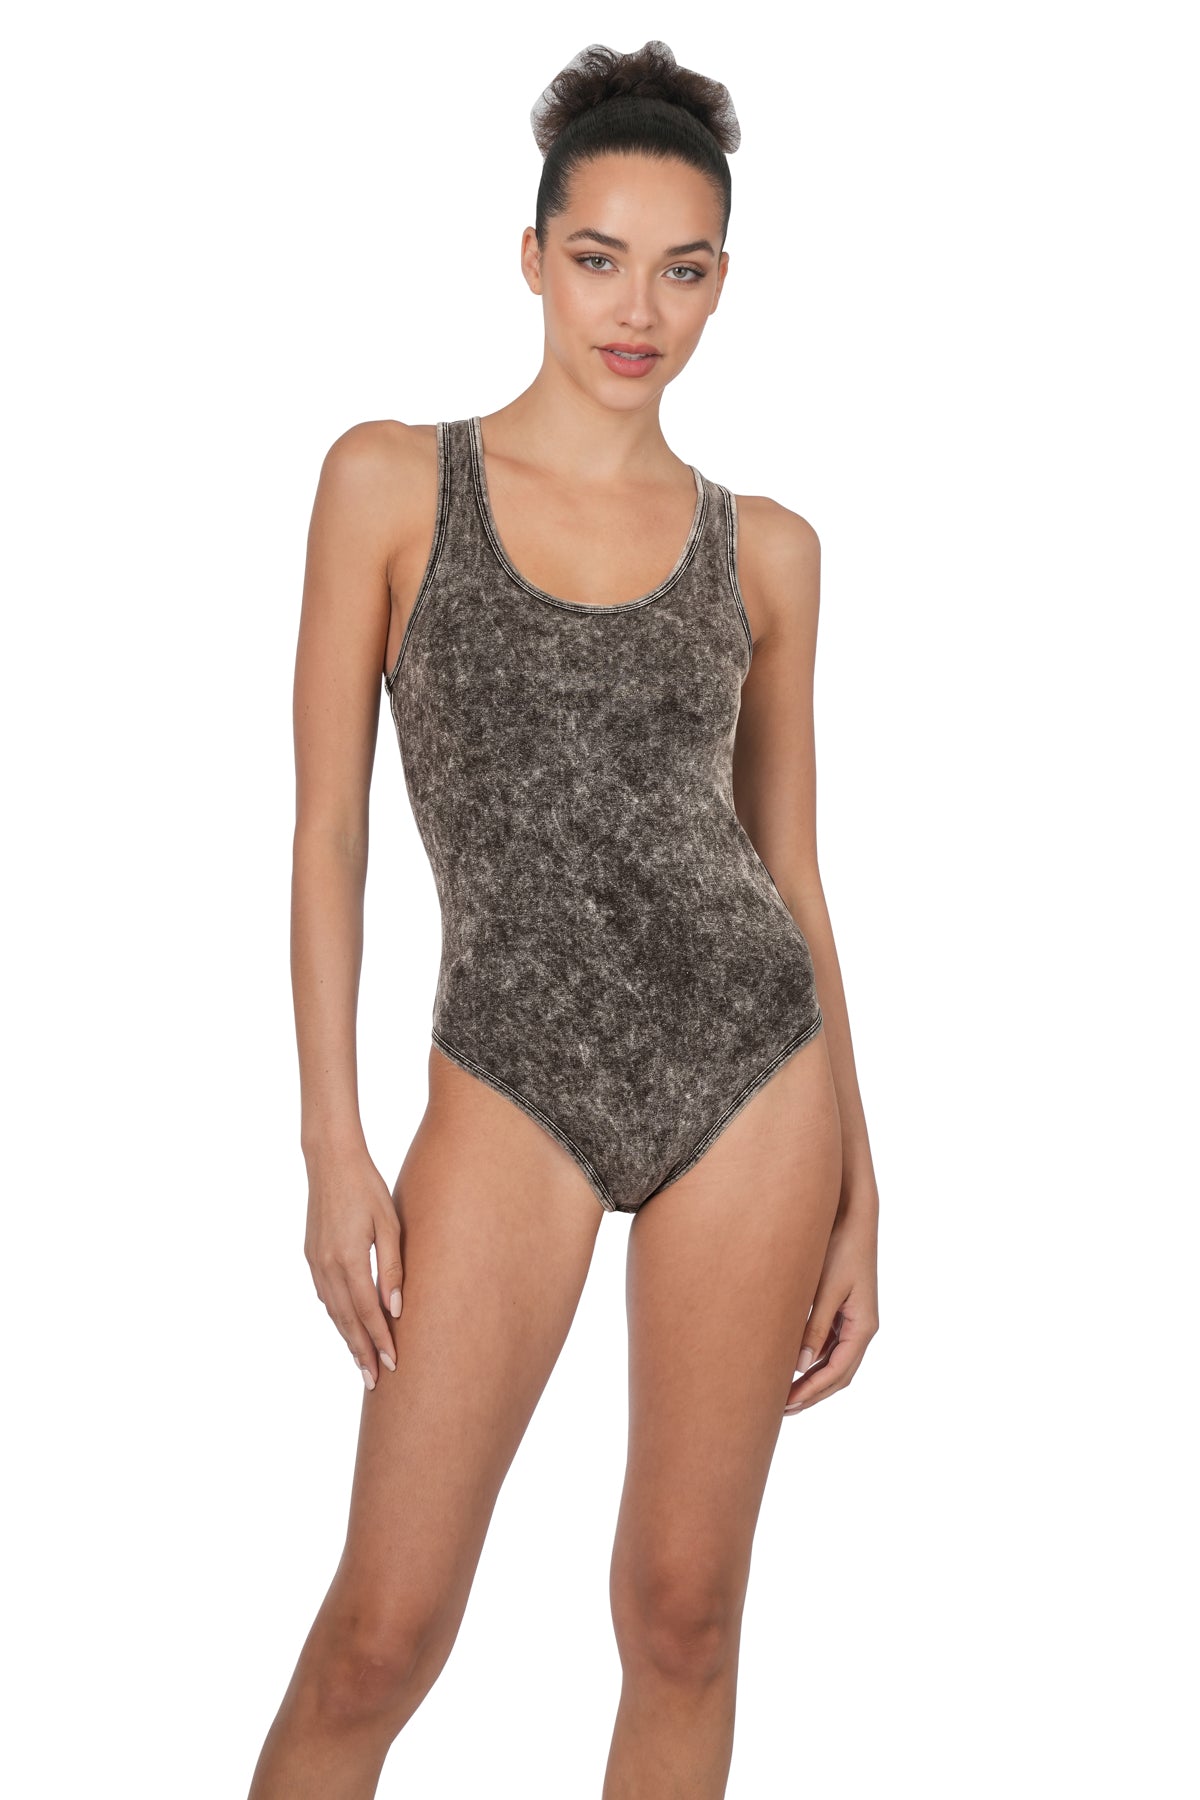 Midnights Bleached Body Suit